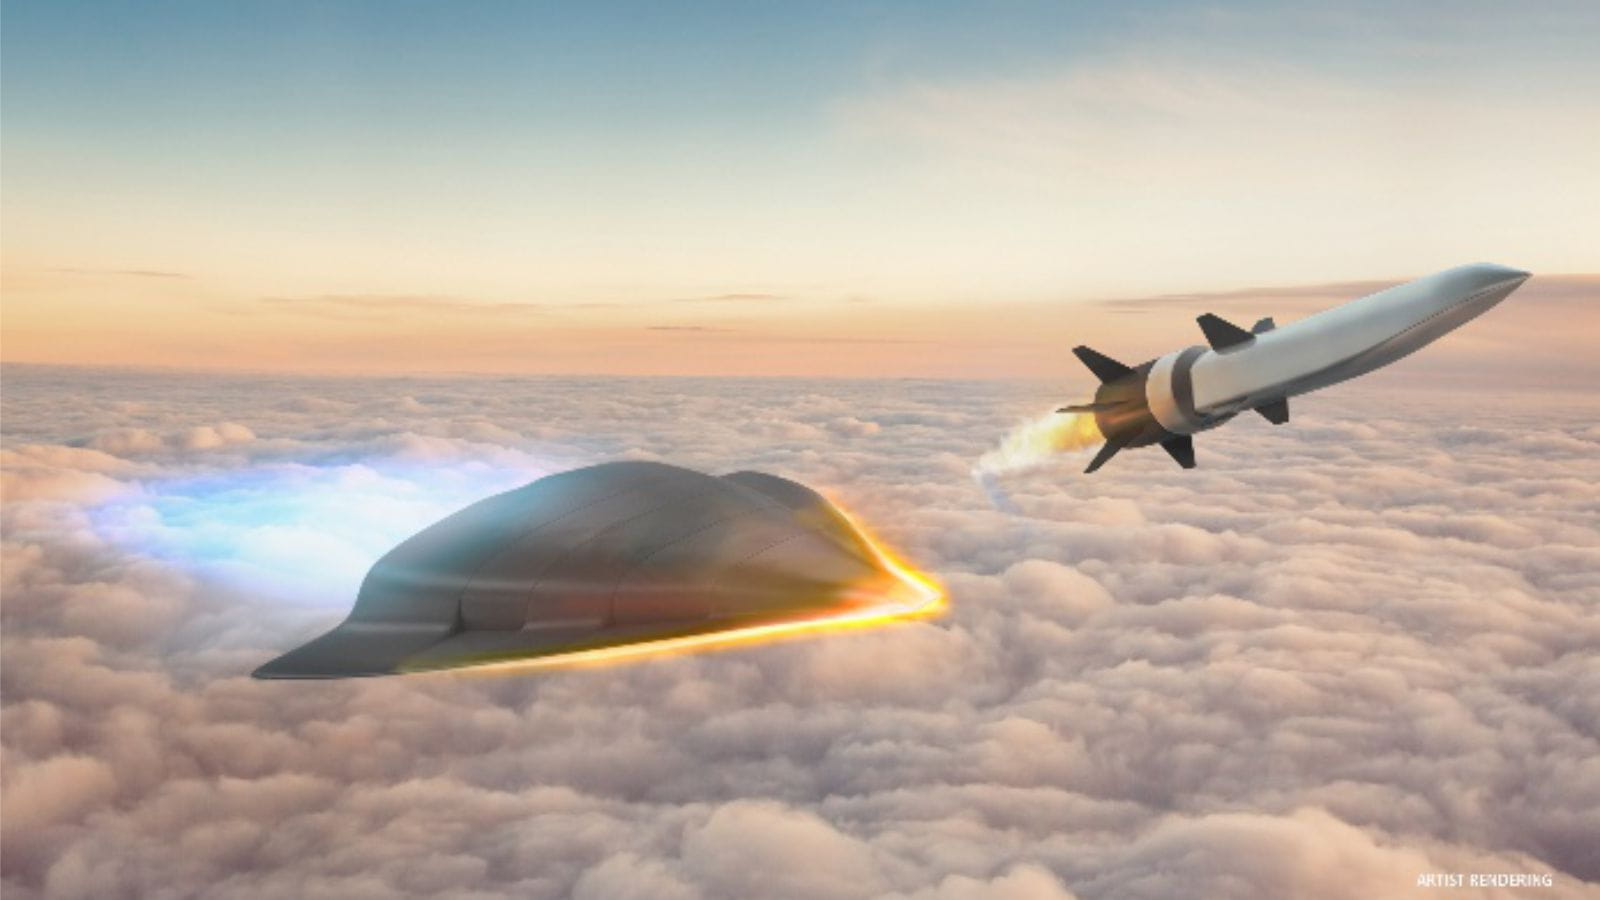 Hypersonic weapons